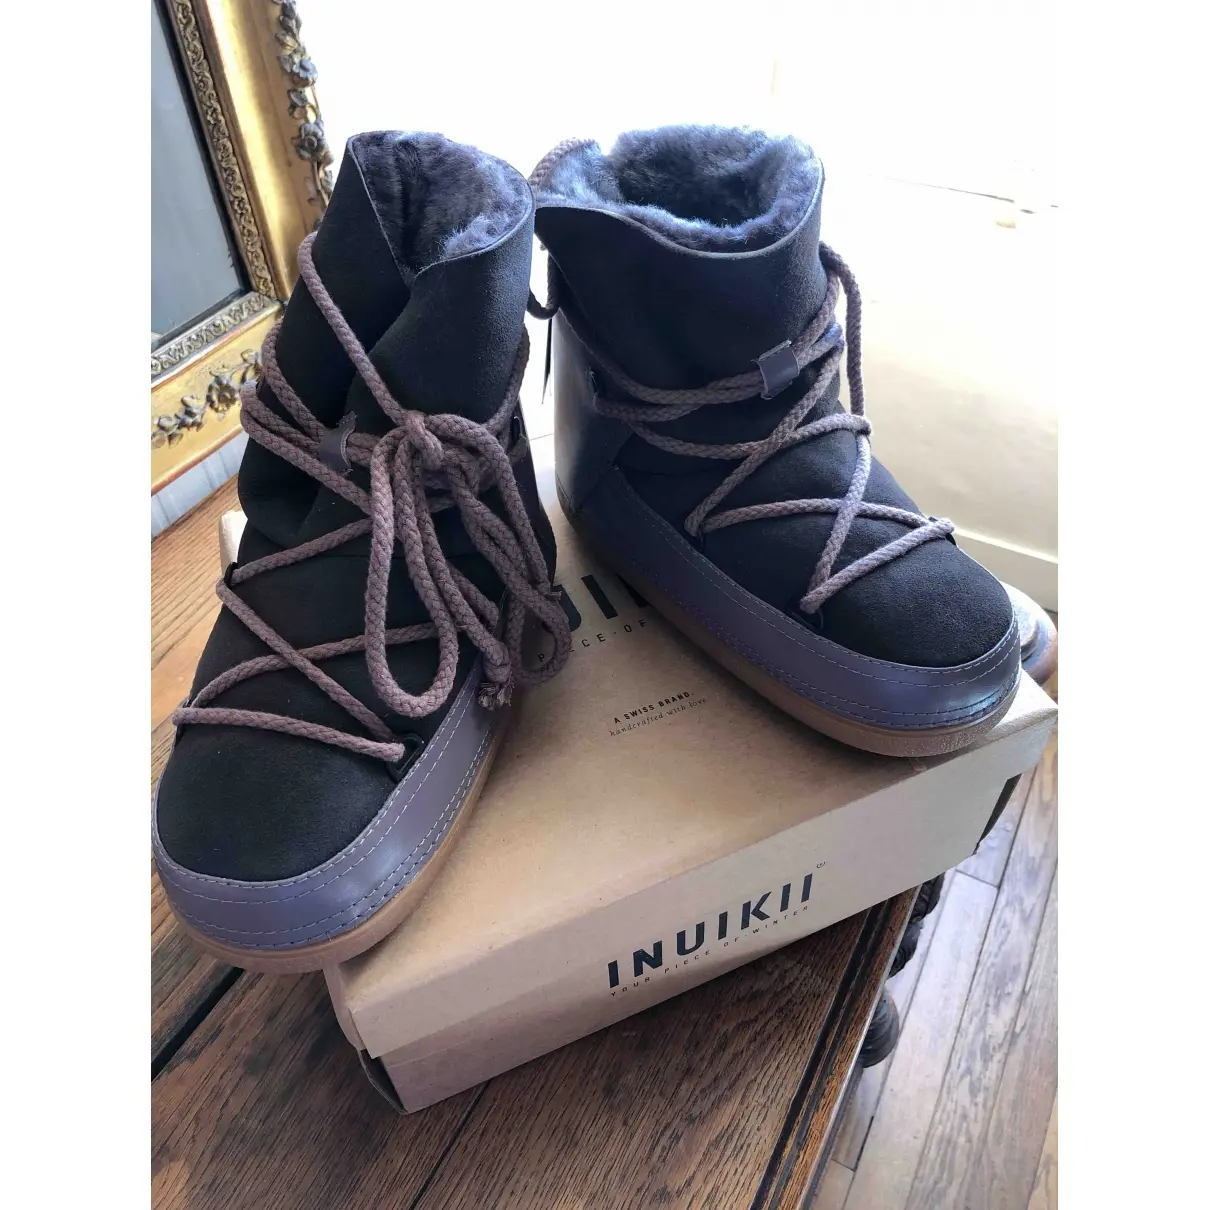 Inuikii Leather snow boots for sale